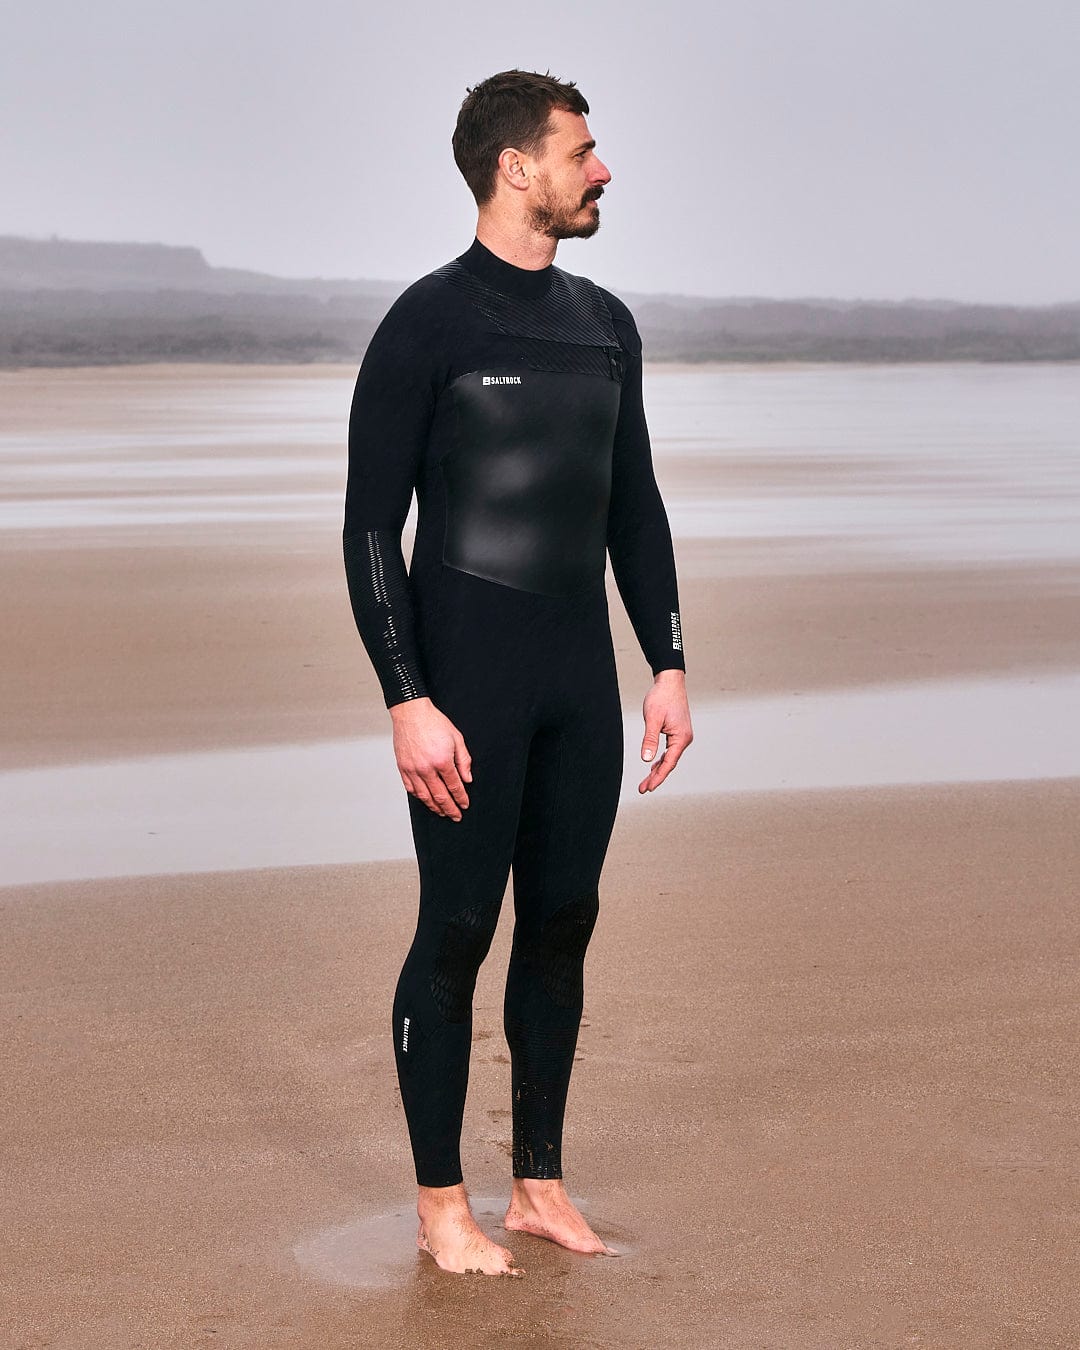 A man standing on the beach in a Saltrock Shockwave - Mens 3/2 Chest Zip Full Wetsuit - Black.